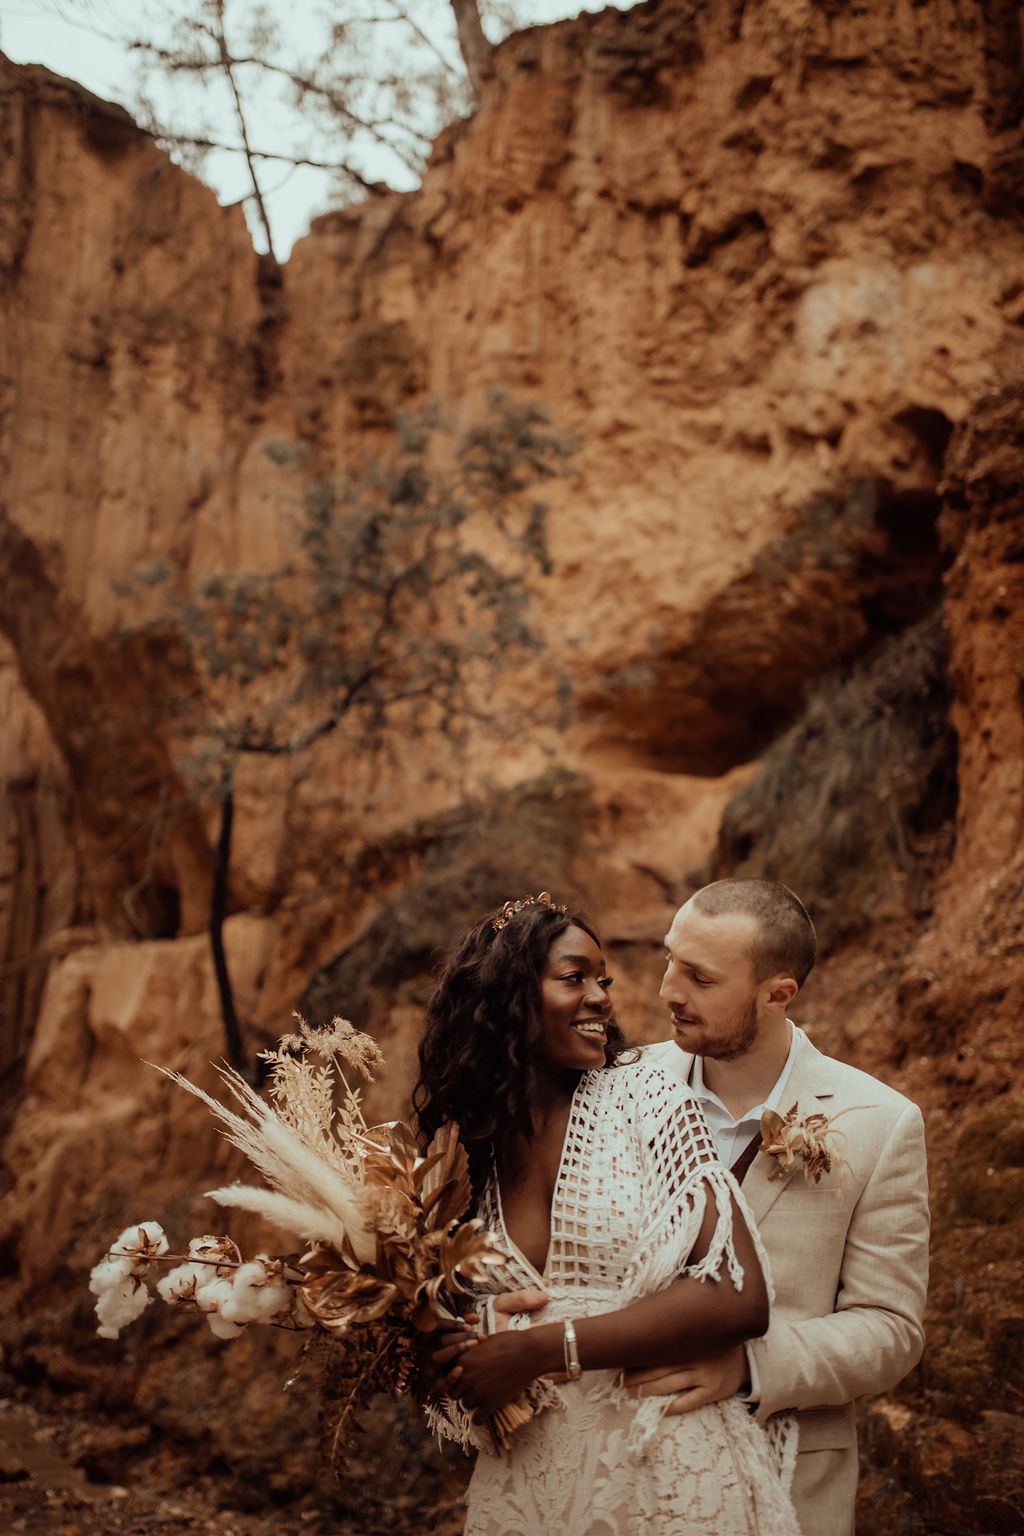 kacie herd photography wedding shoot bohemian bridal gown dried floral arrangement with golden accents